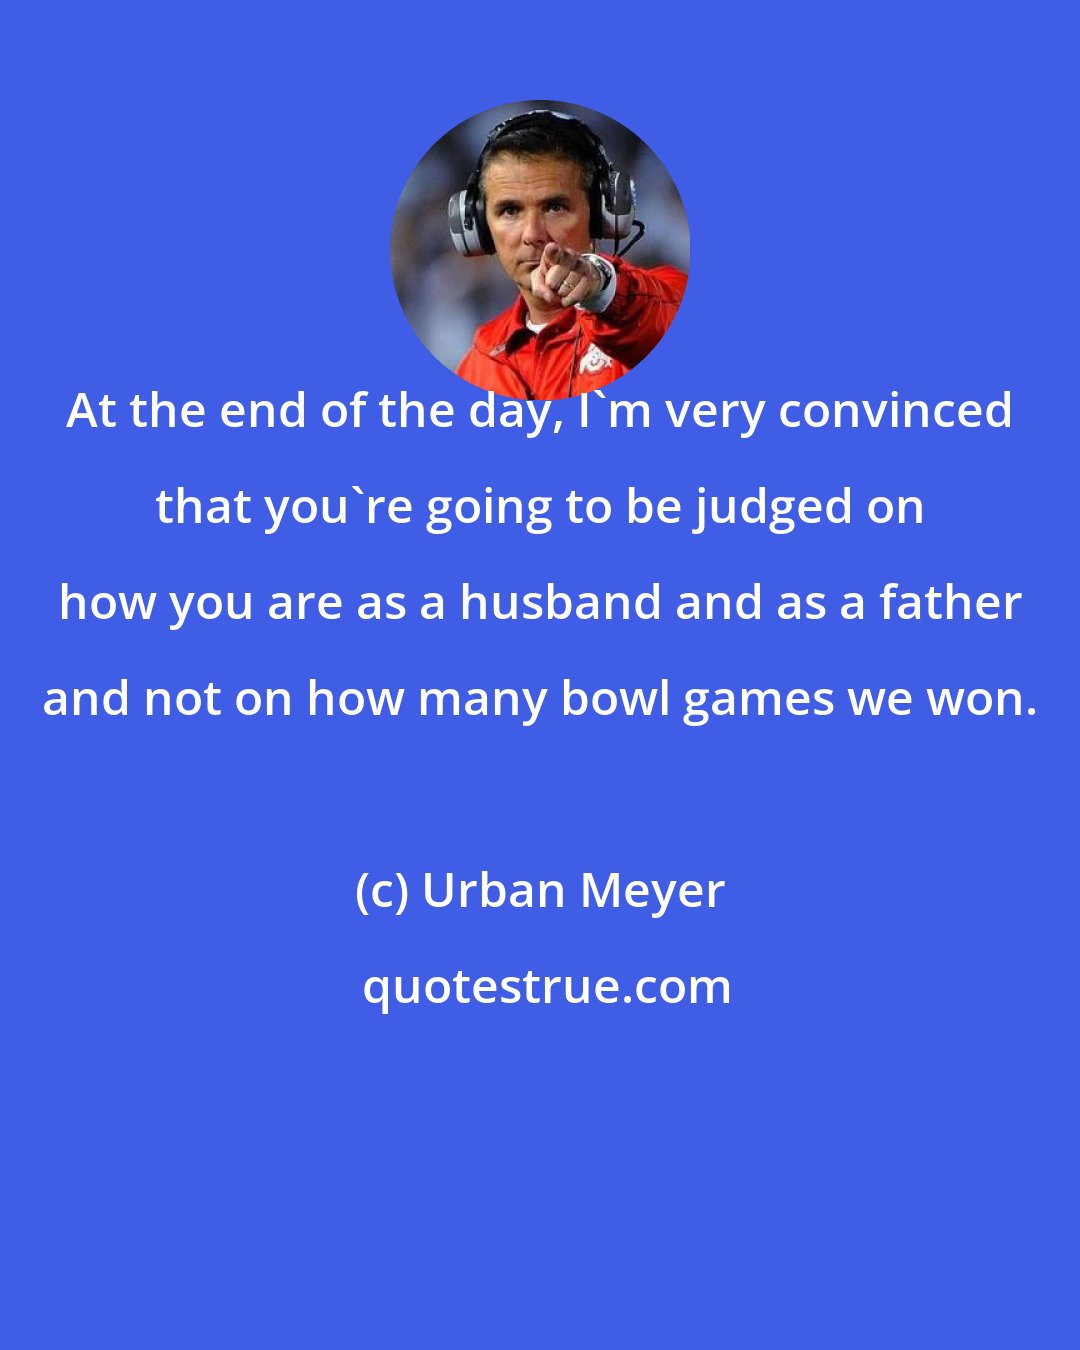 Urban Meyer: At the end of the day, I'm very convinced that you're going to be judged on how you are as a husband and as a father and not on how many bowl games we won.